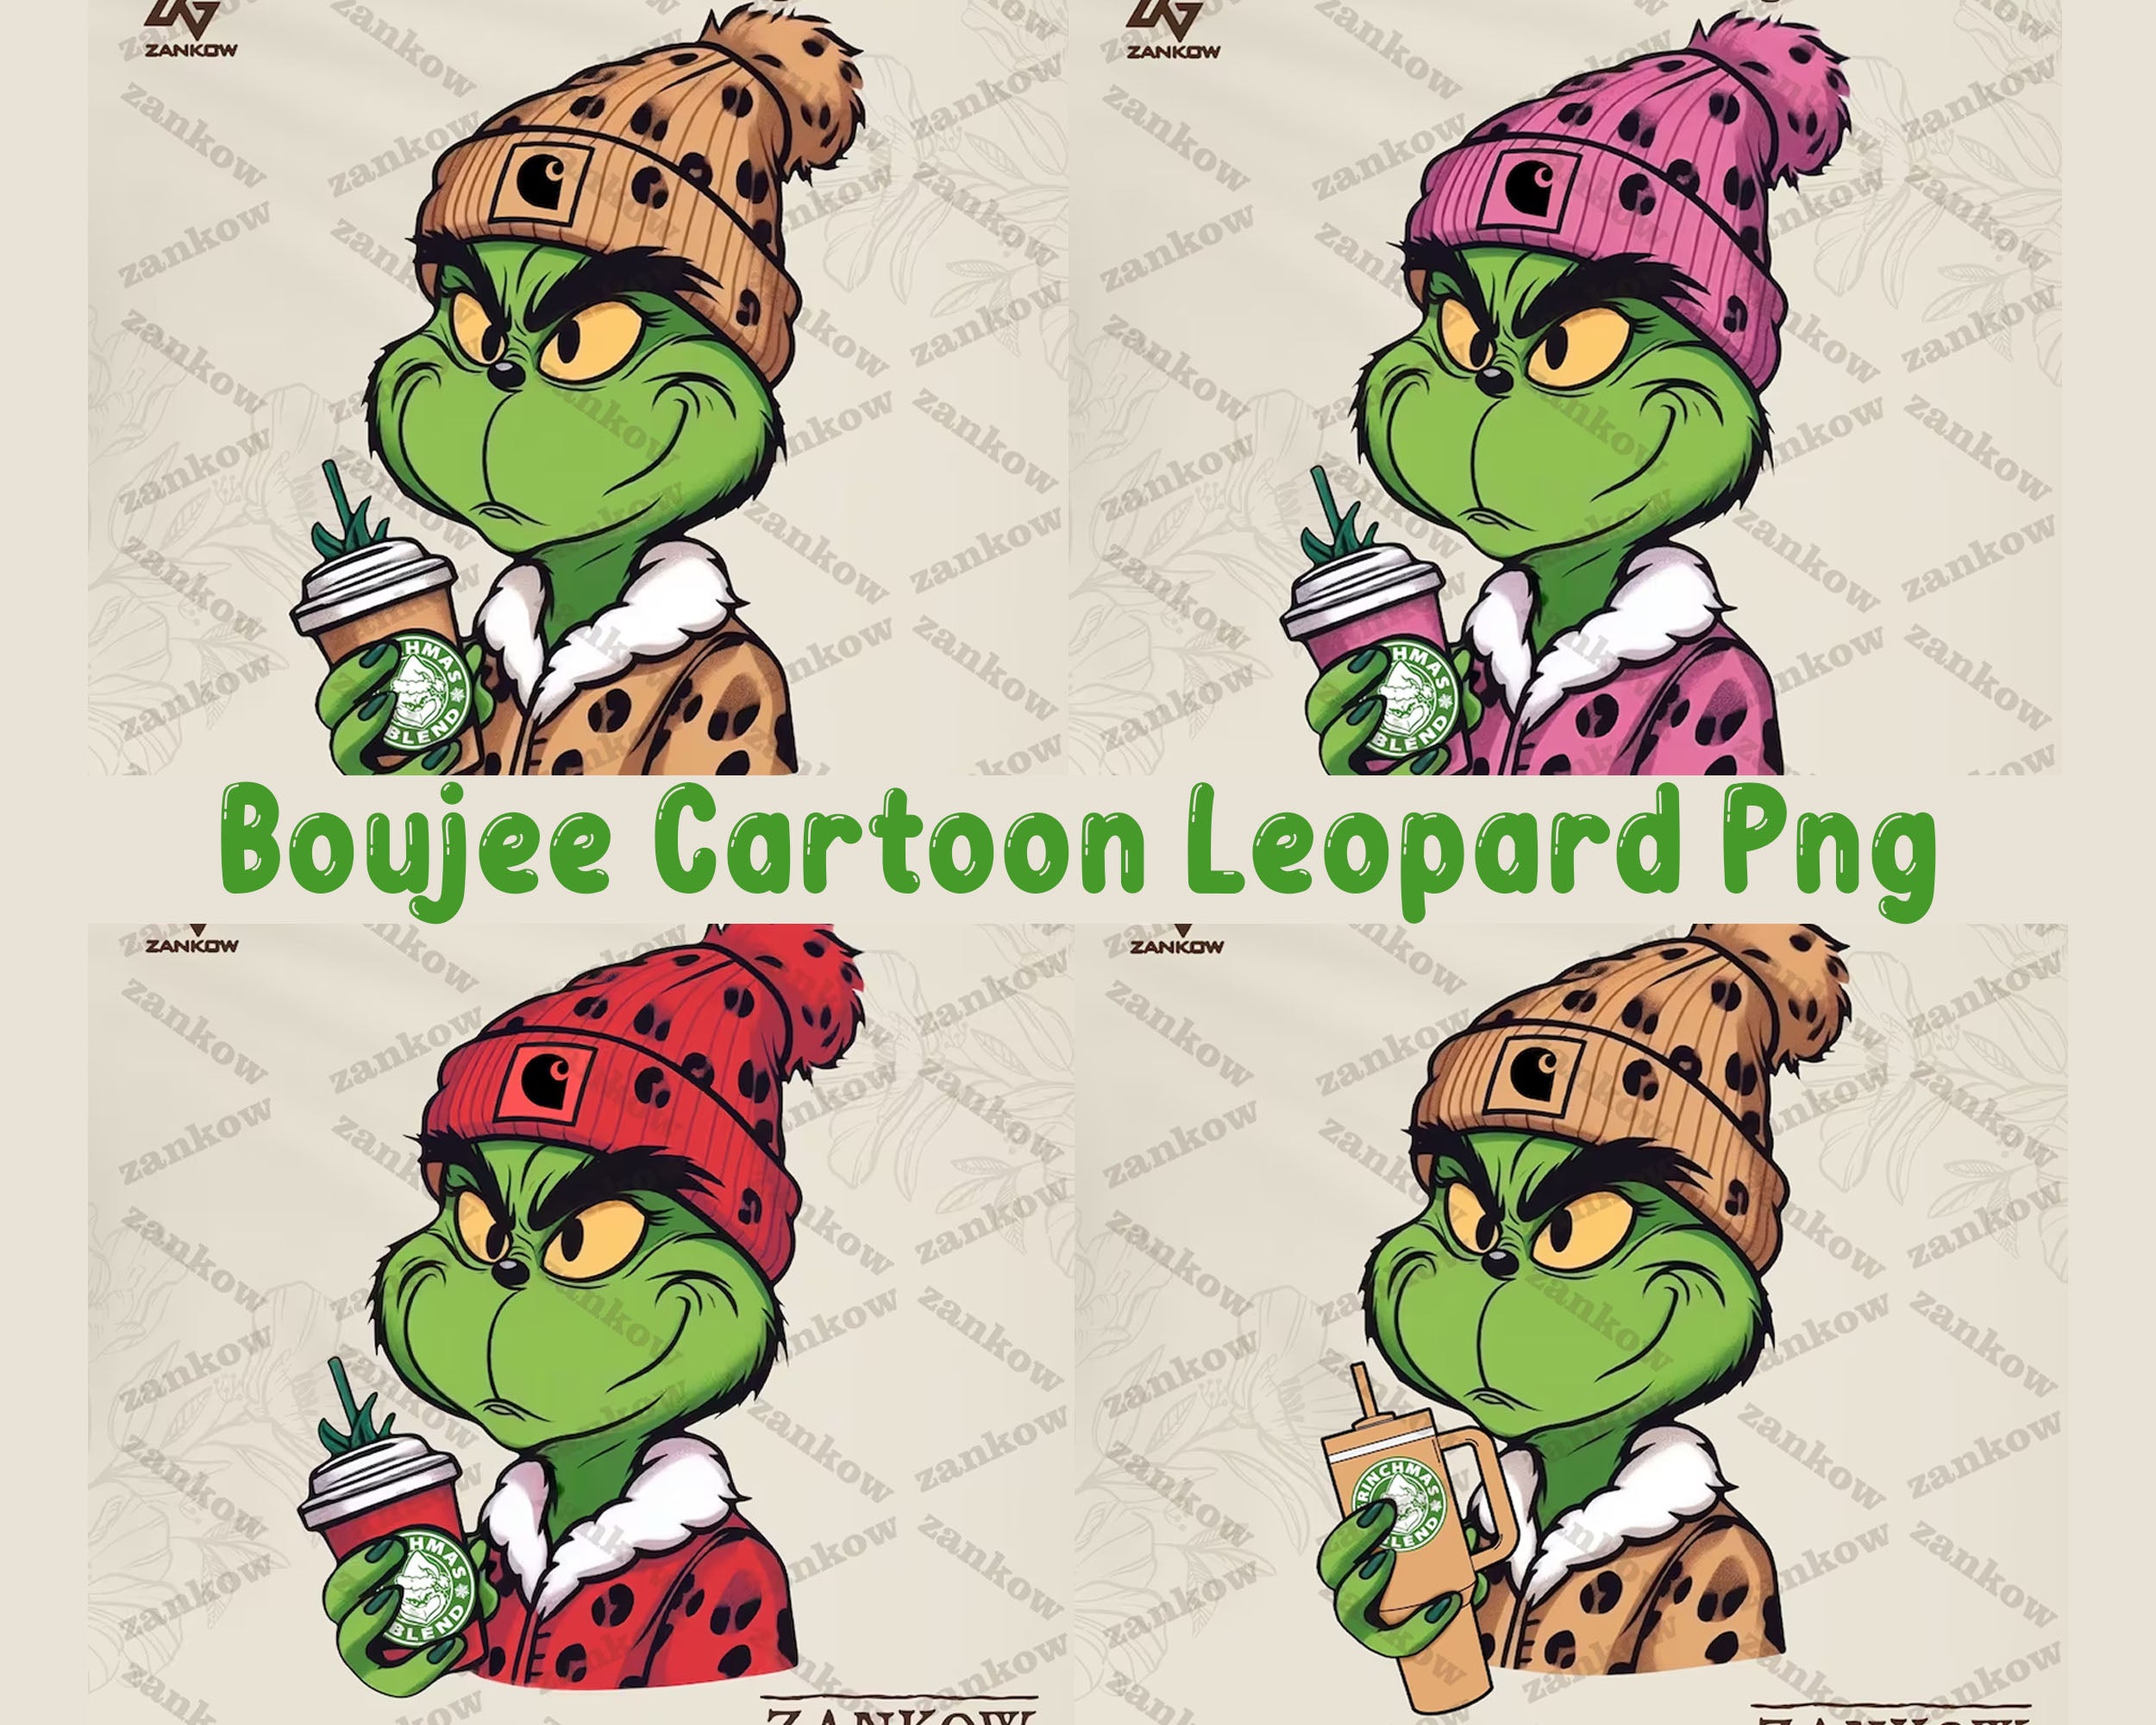 Boujee Cartoon Leopard Png, Caffeinated Cartoon Png, Coffee Christmas Png